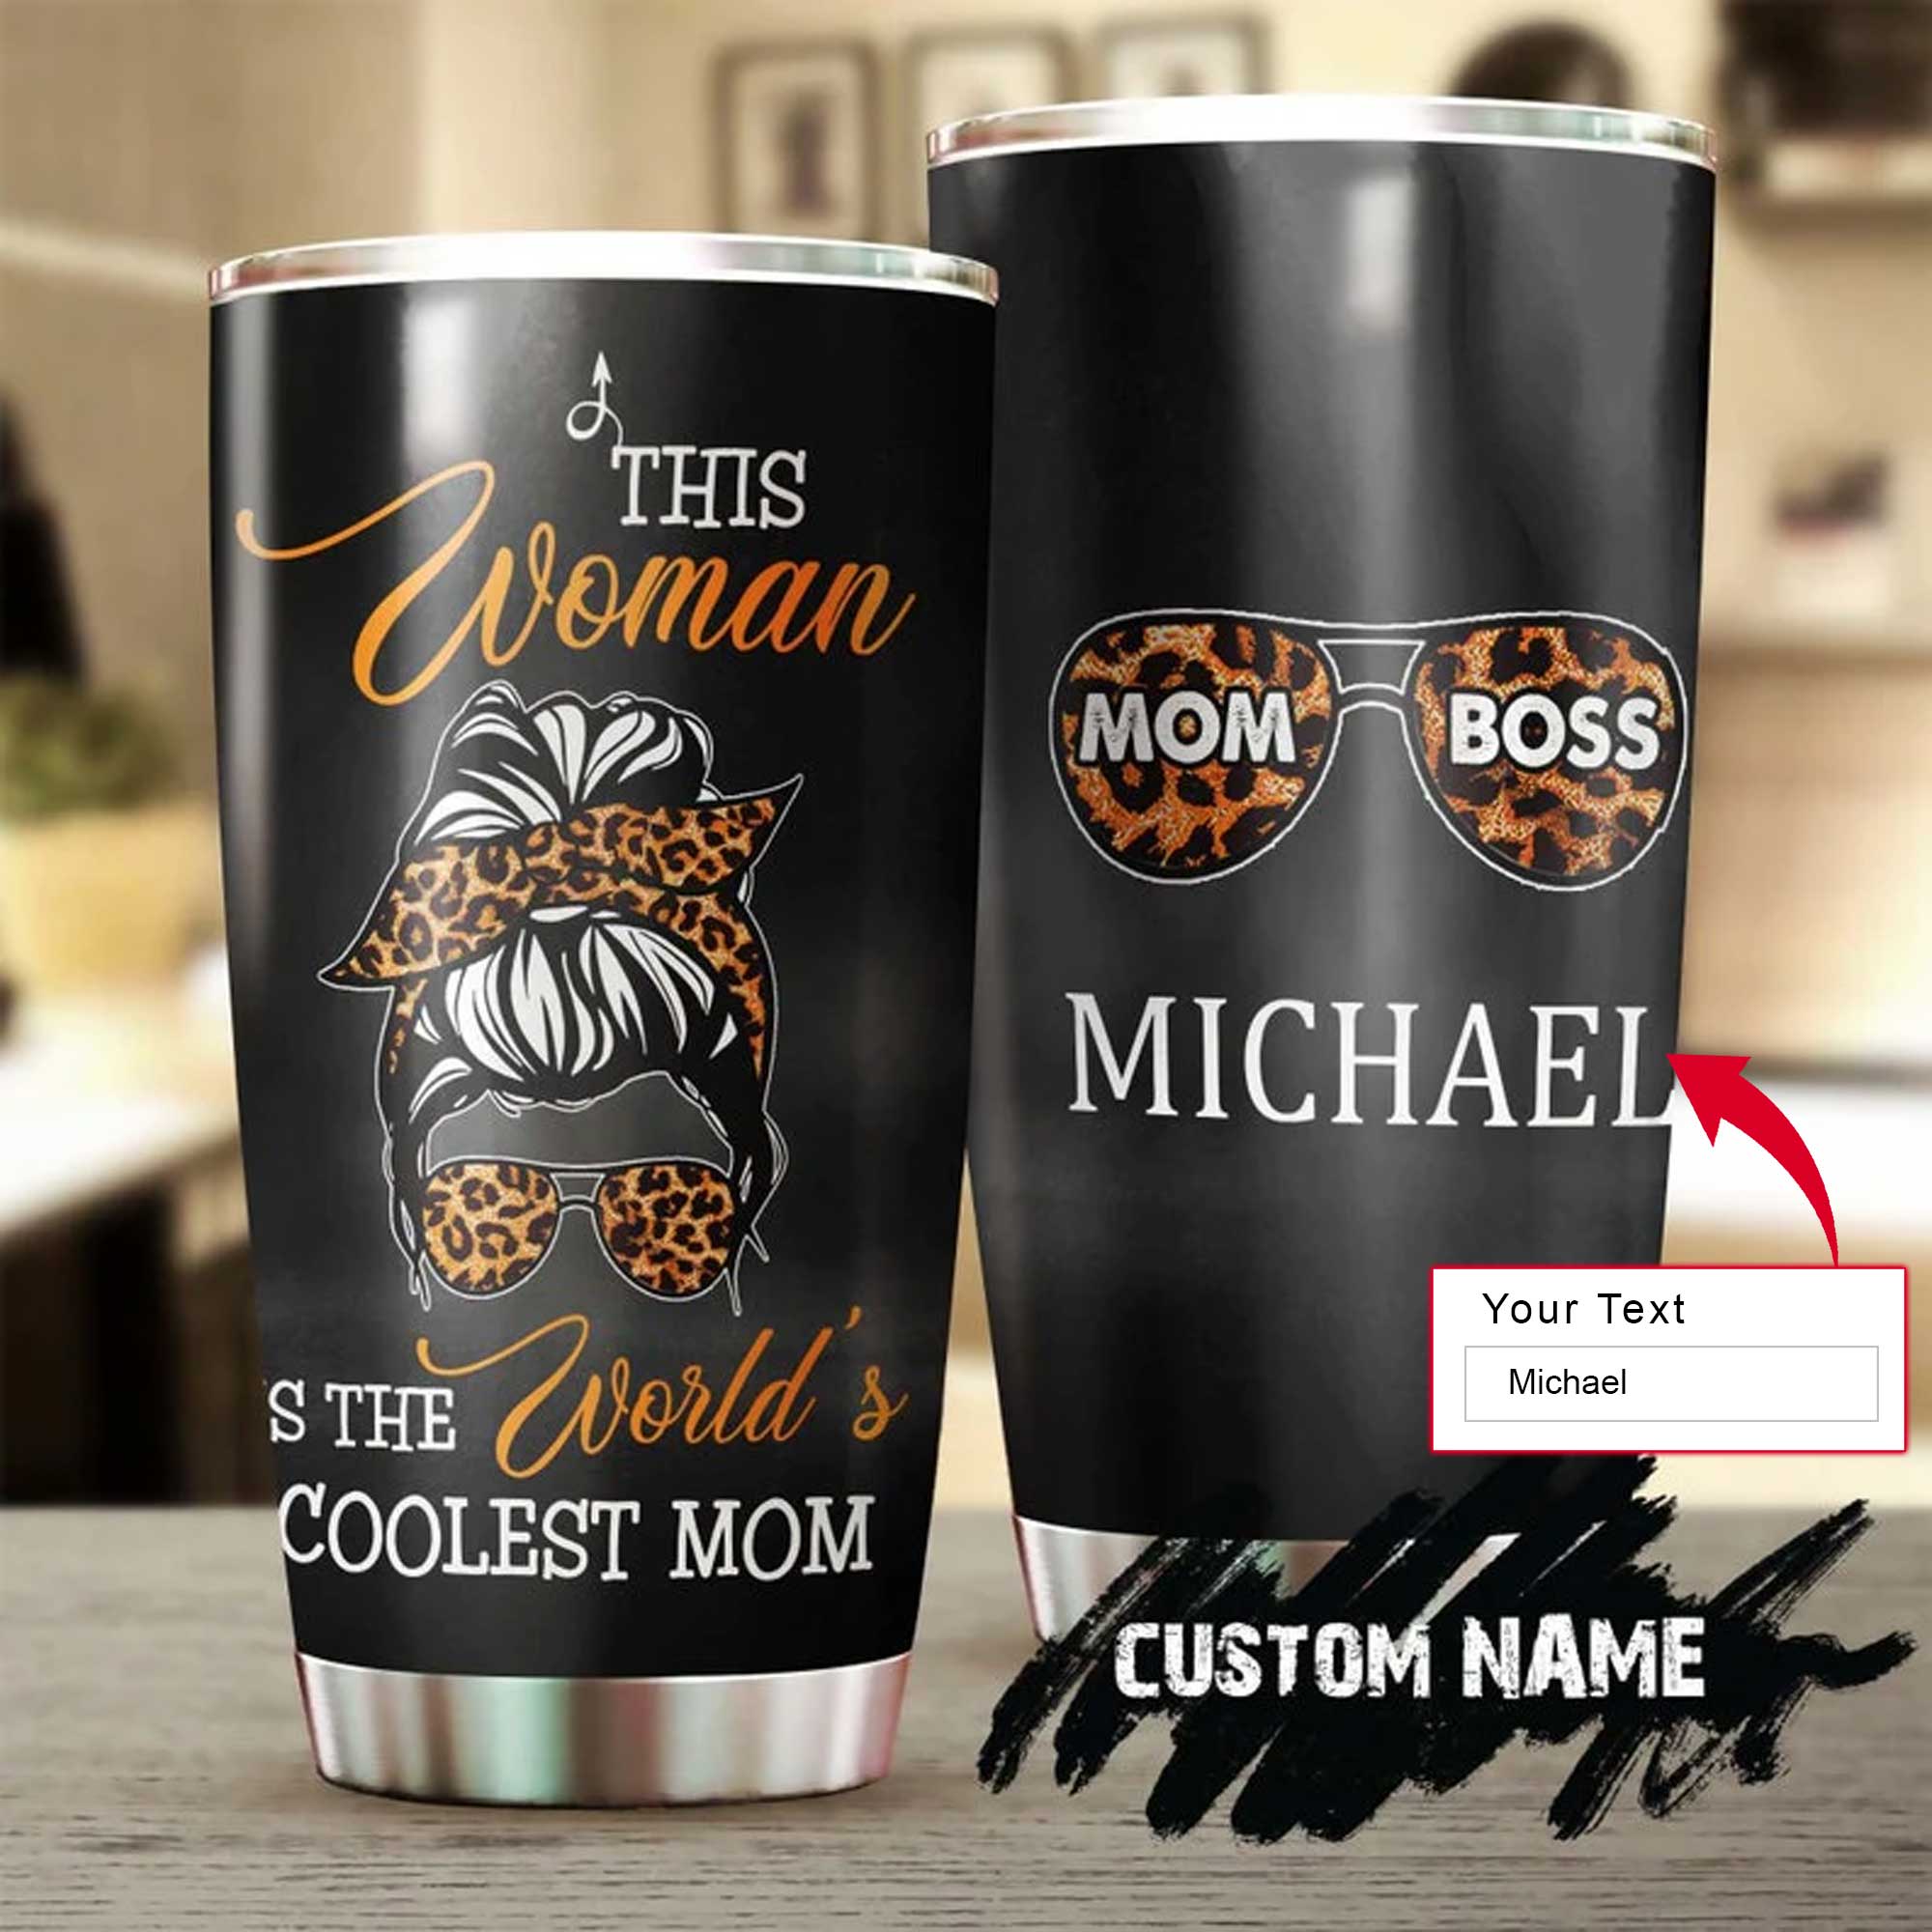 Personalized Mother's Day Gift Tumbler - Custom Gift For Mother's Day, Presents for Mom - Mom This Woman Is The Coolest Mom In The World Tumbler